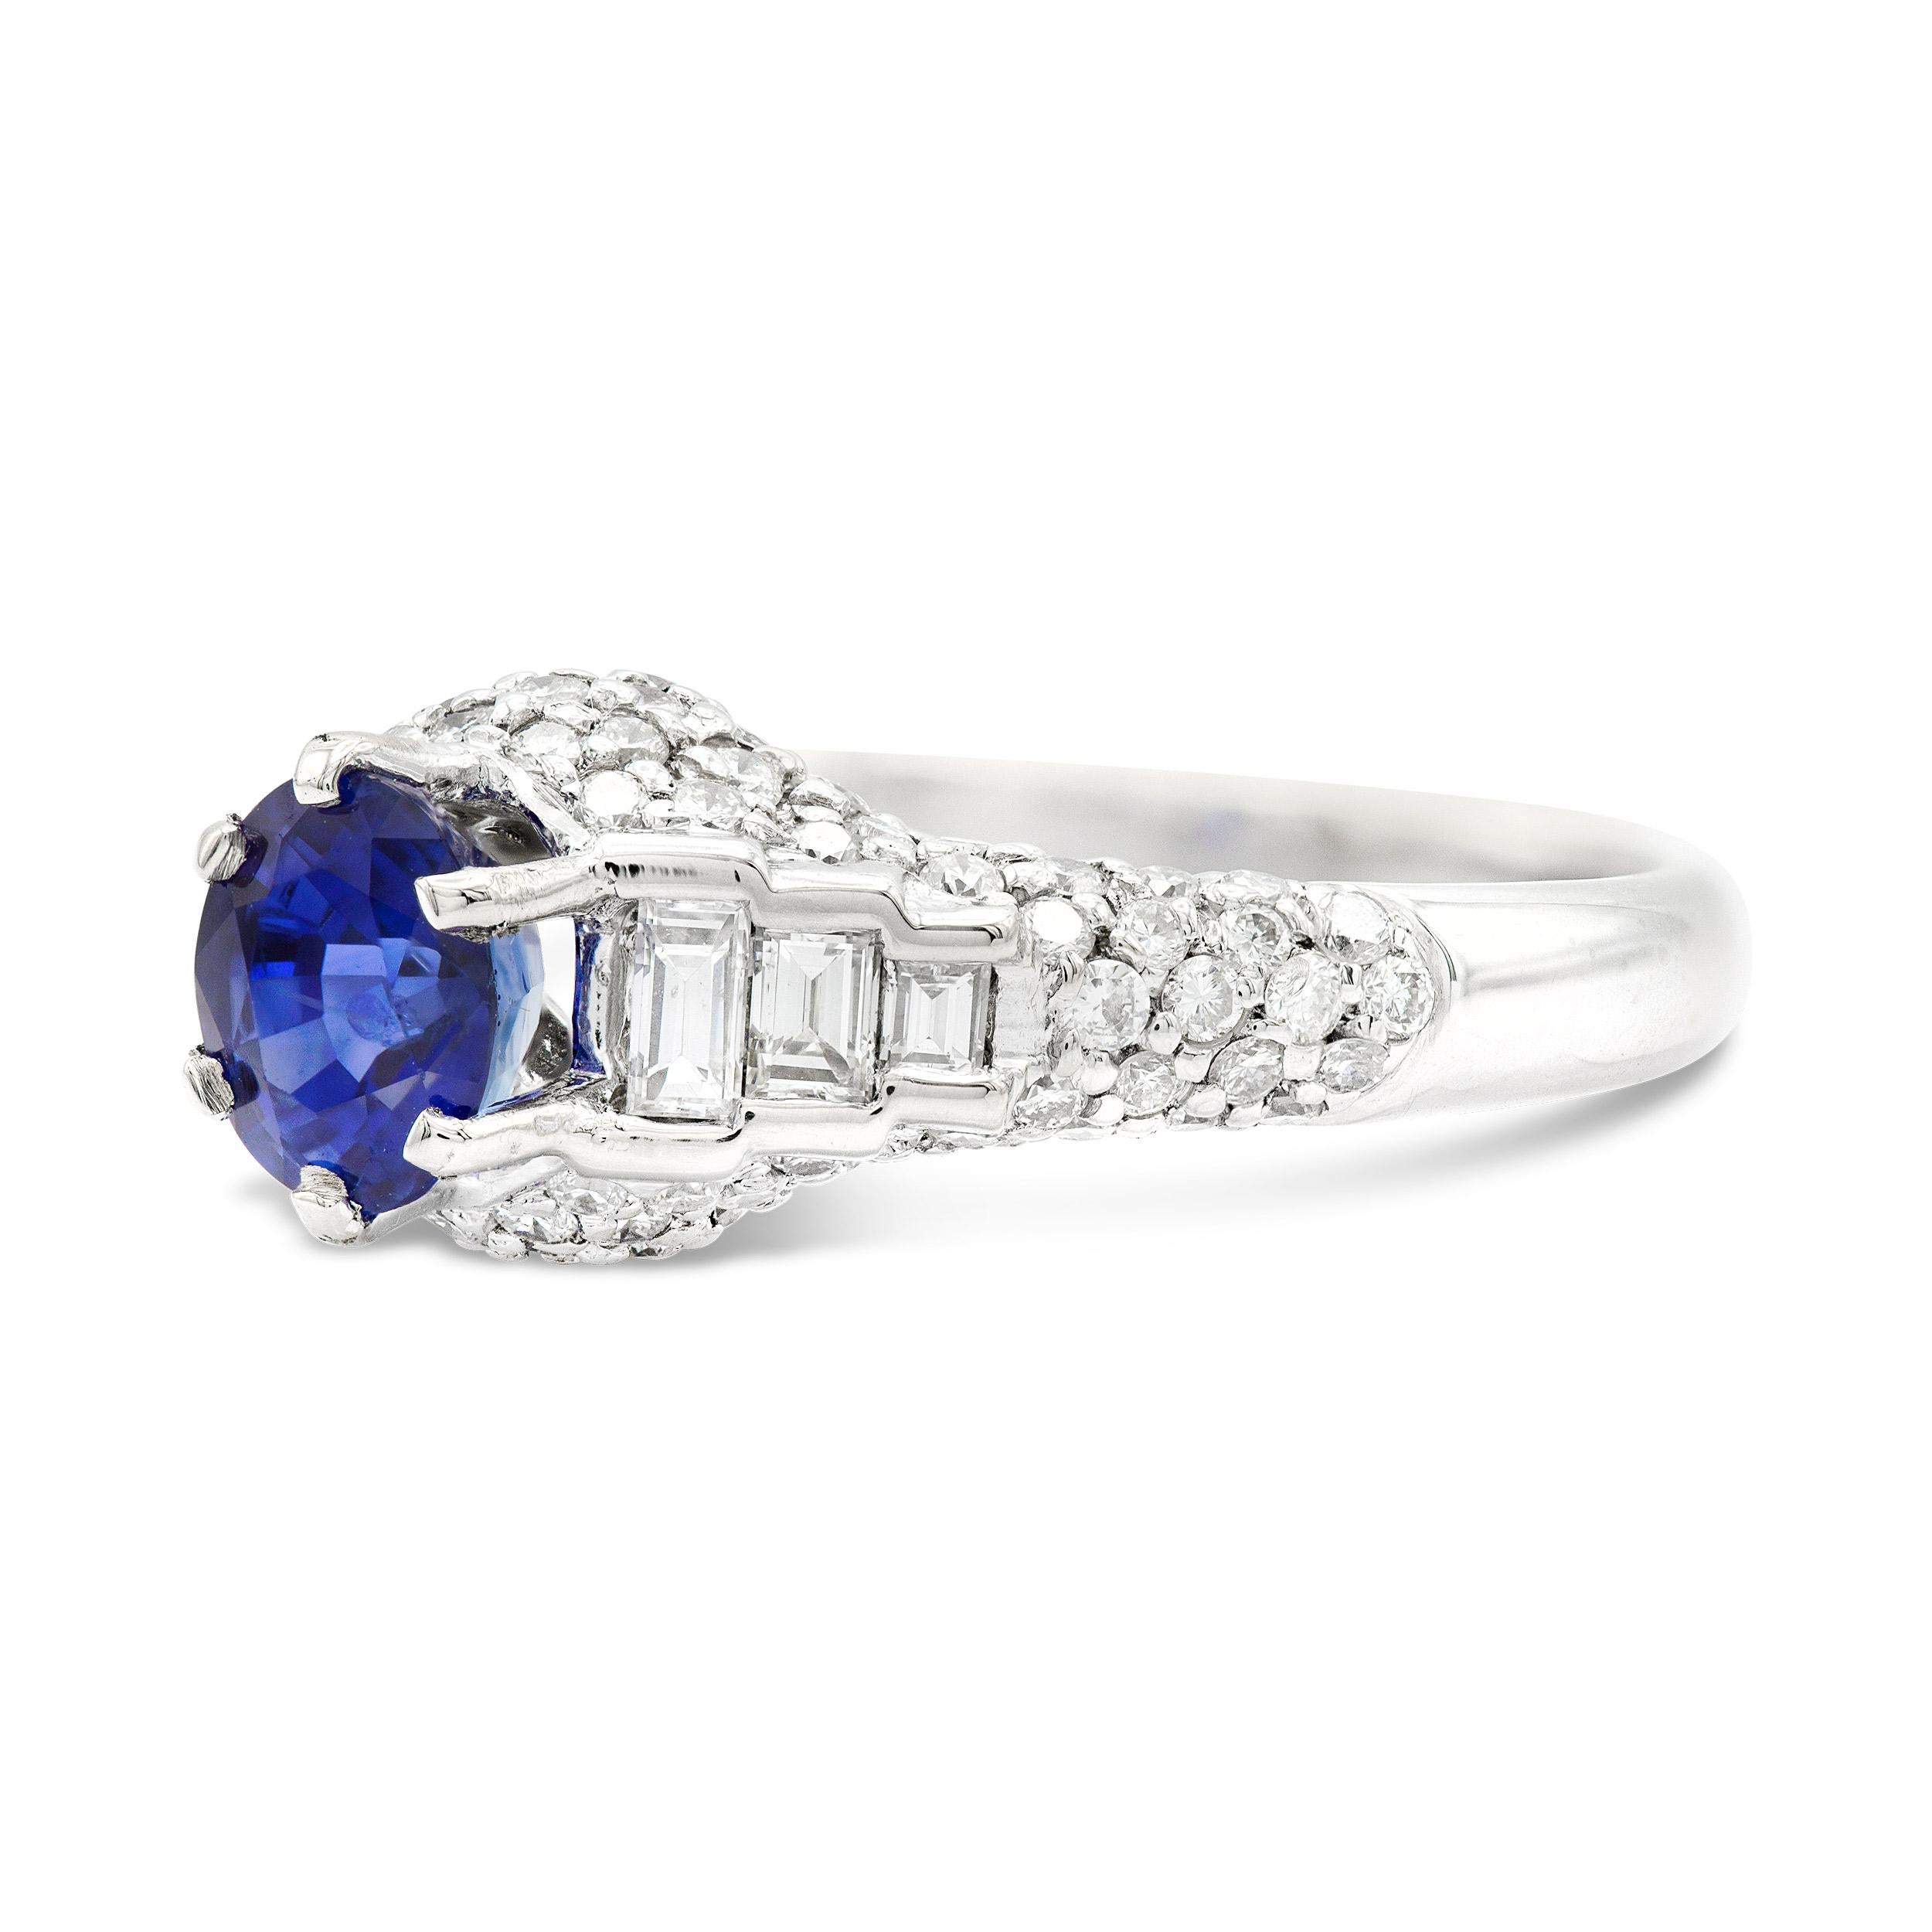 We're so into the deep blue color of the GIA certified oval cut sapphire that centers this vintage ring. A blinged-out look for sure, featuring dozens of diamonds, including some sleek straight baguettes. Sapphires are fit for any and all occasions,